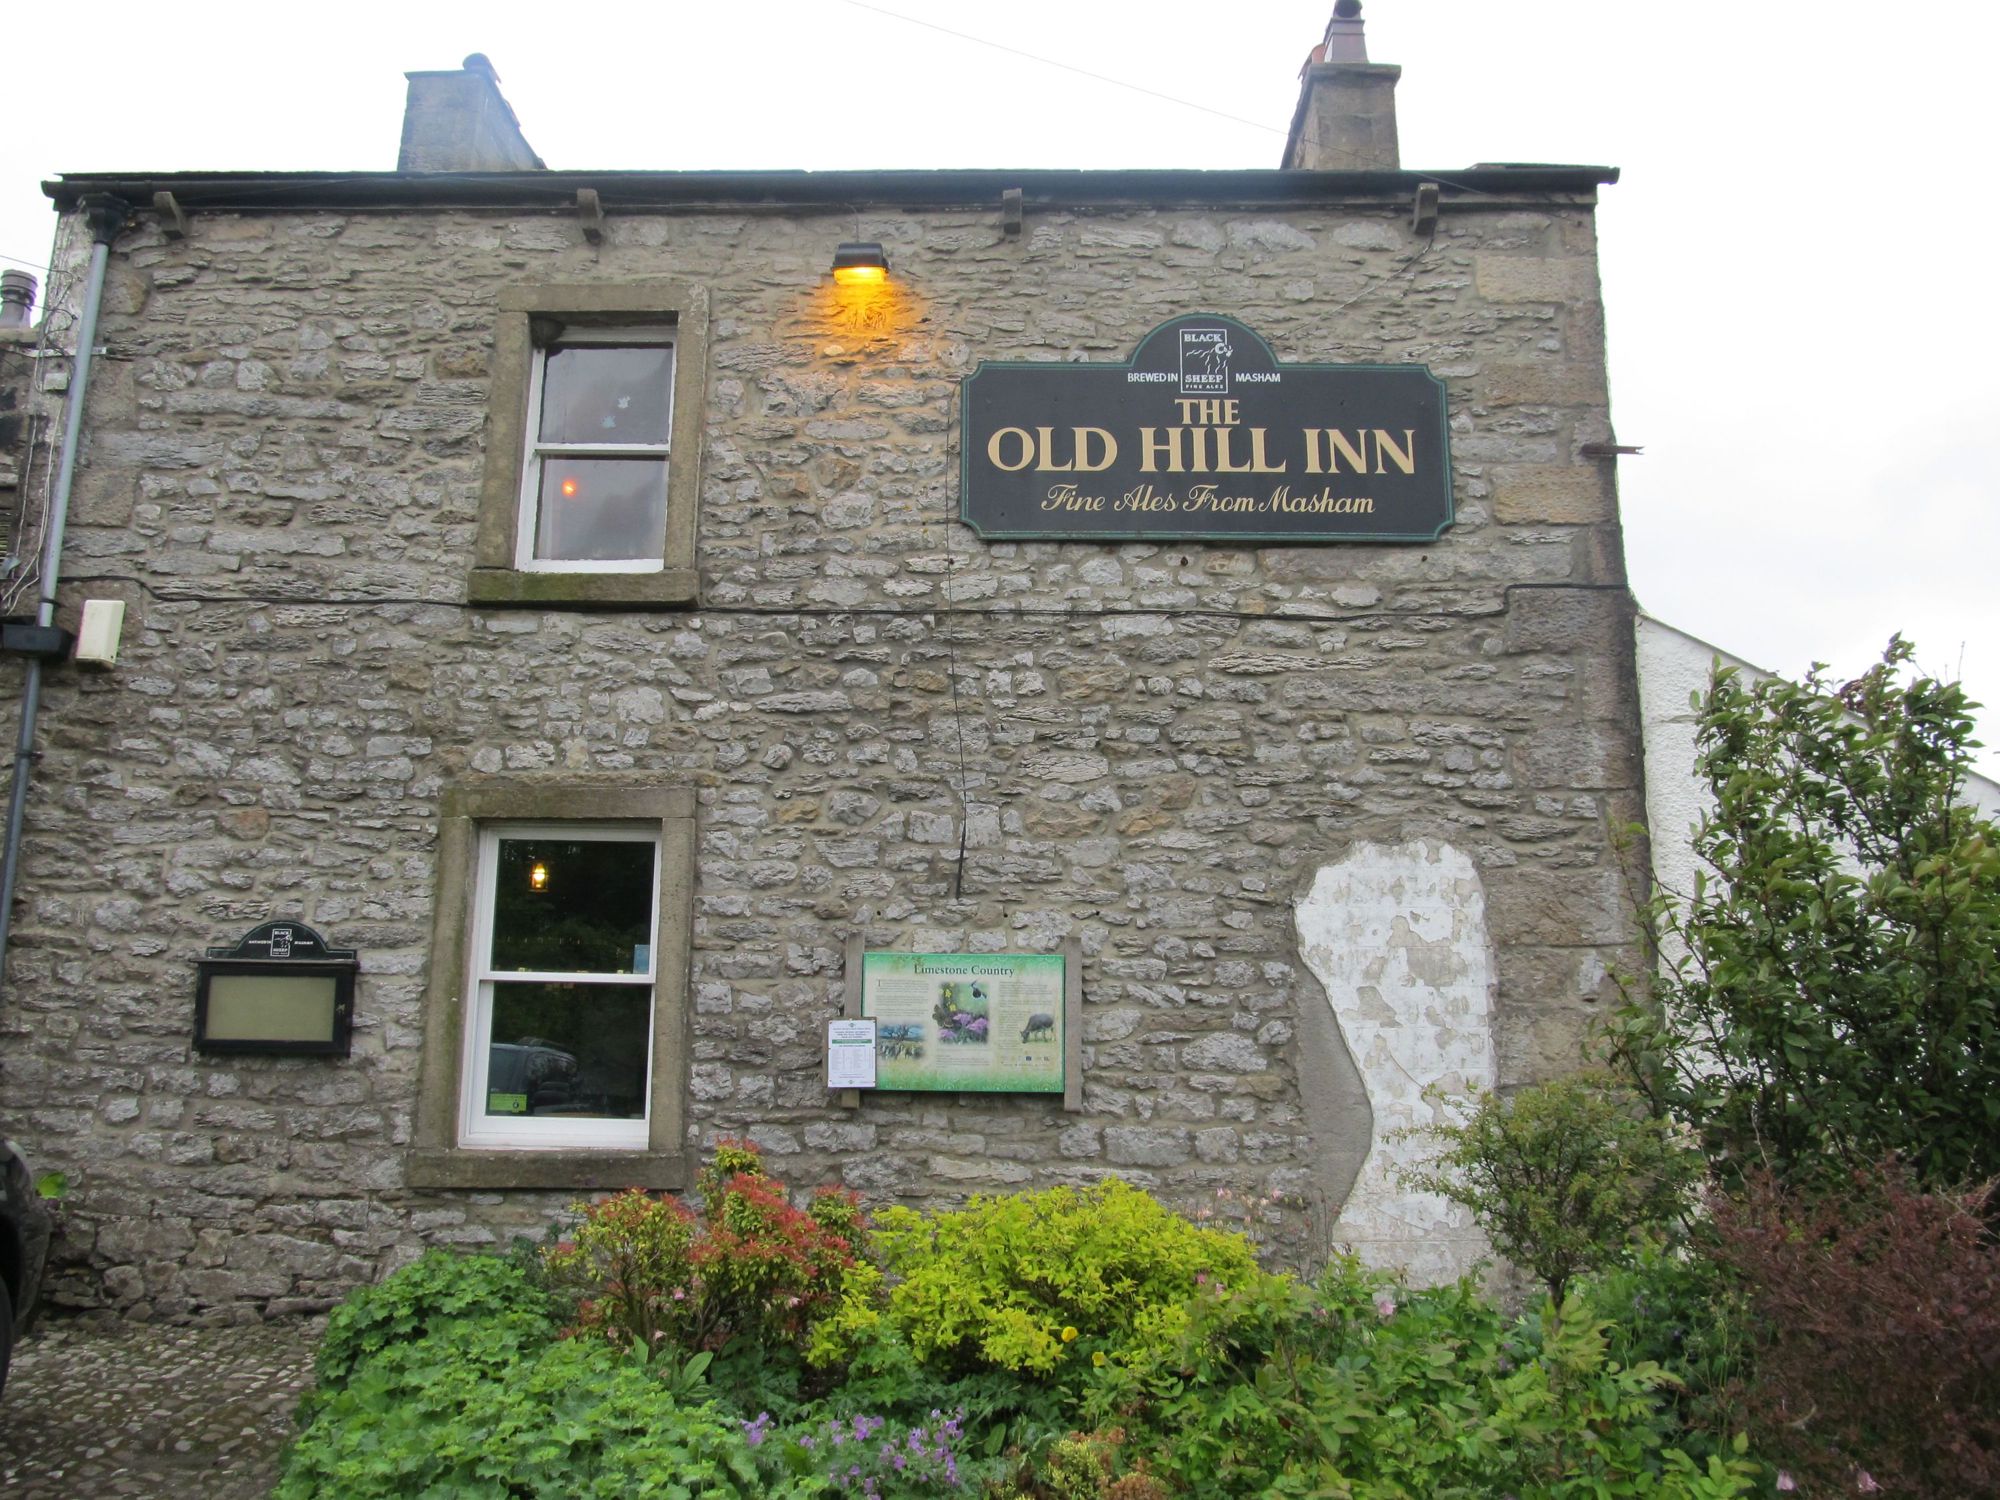 Hotels in Ingleton holidays at Cool Places